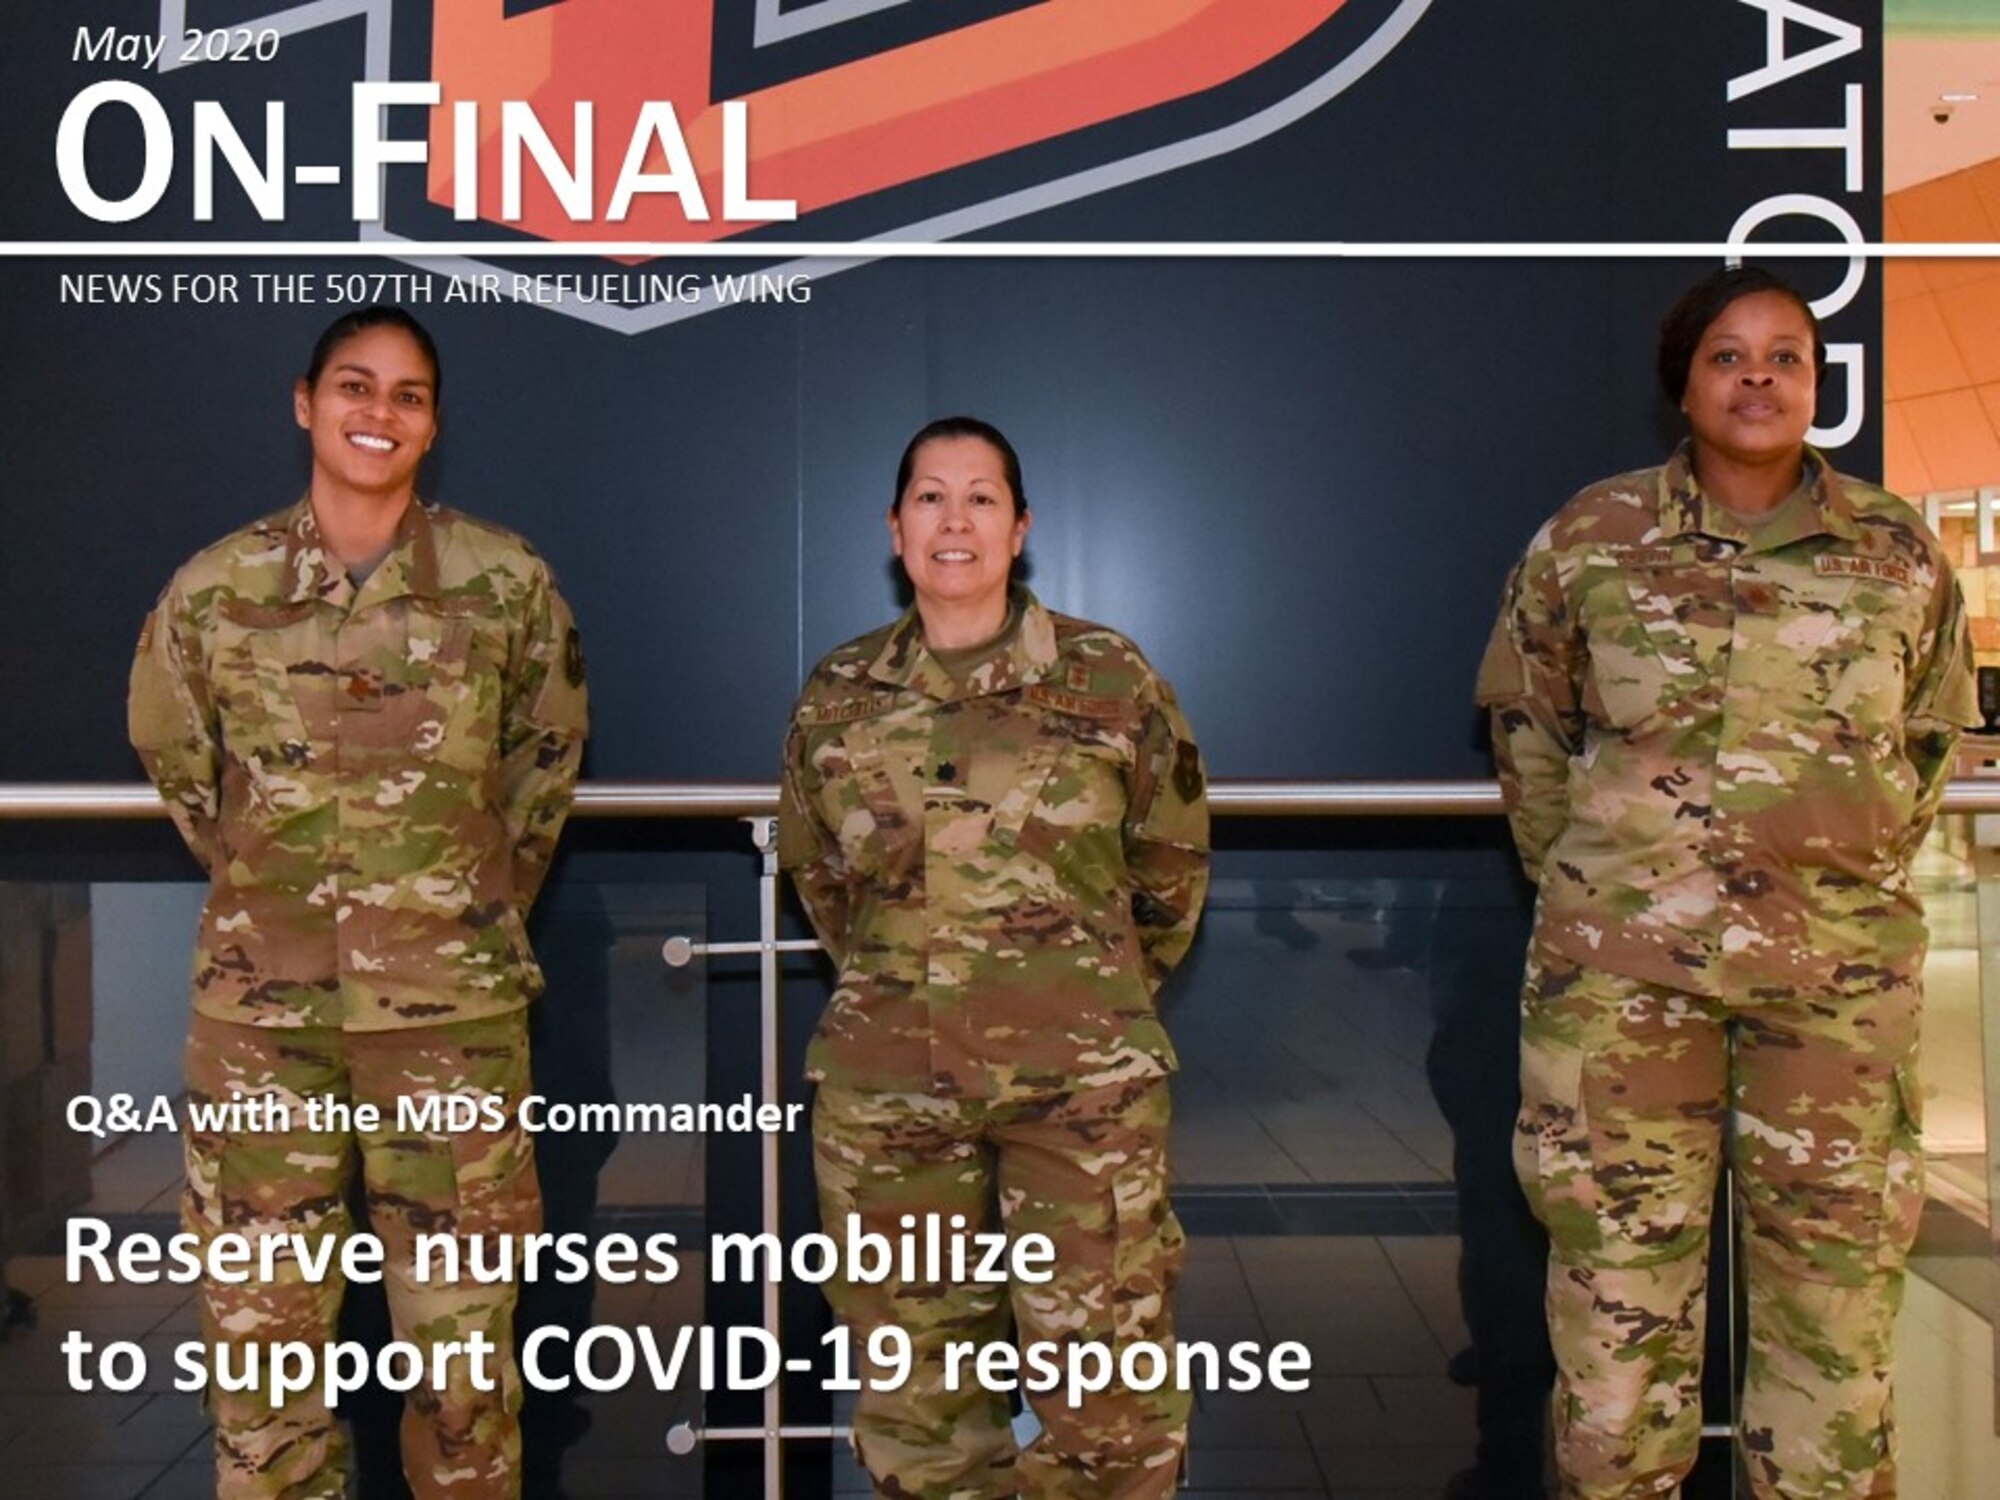 Maj. Lisa Morris, Lt. Col. Esther Mitchell and Maj. Jolina Griffin, nurses with the 507th Medical Squadron at Tinker Air Force Base, Oklahoma, prepare to deploy to help the fight against COVID-19 April 7, 2020. The deployment is part of a larger mobilization package of more than 120 doctors, nurses and respiratory technicians Air Force Reserve units across the nation provided within 48 hours in support of COVID-19 response to take care of Americans. (U.S. Air Force graphic by Senior Airman Mary Begy)